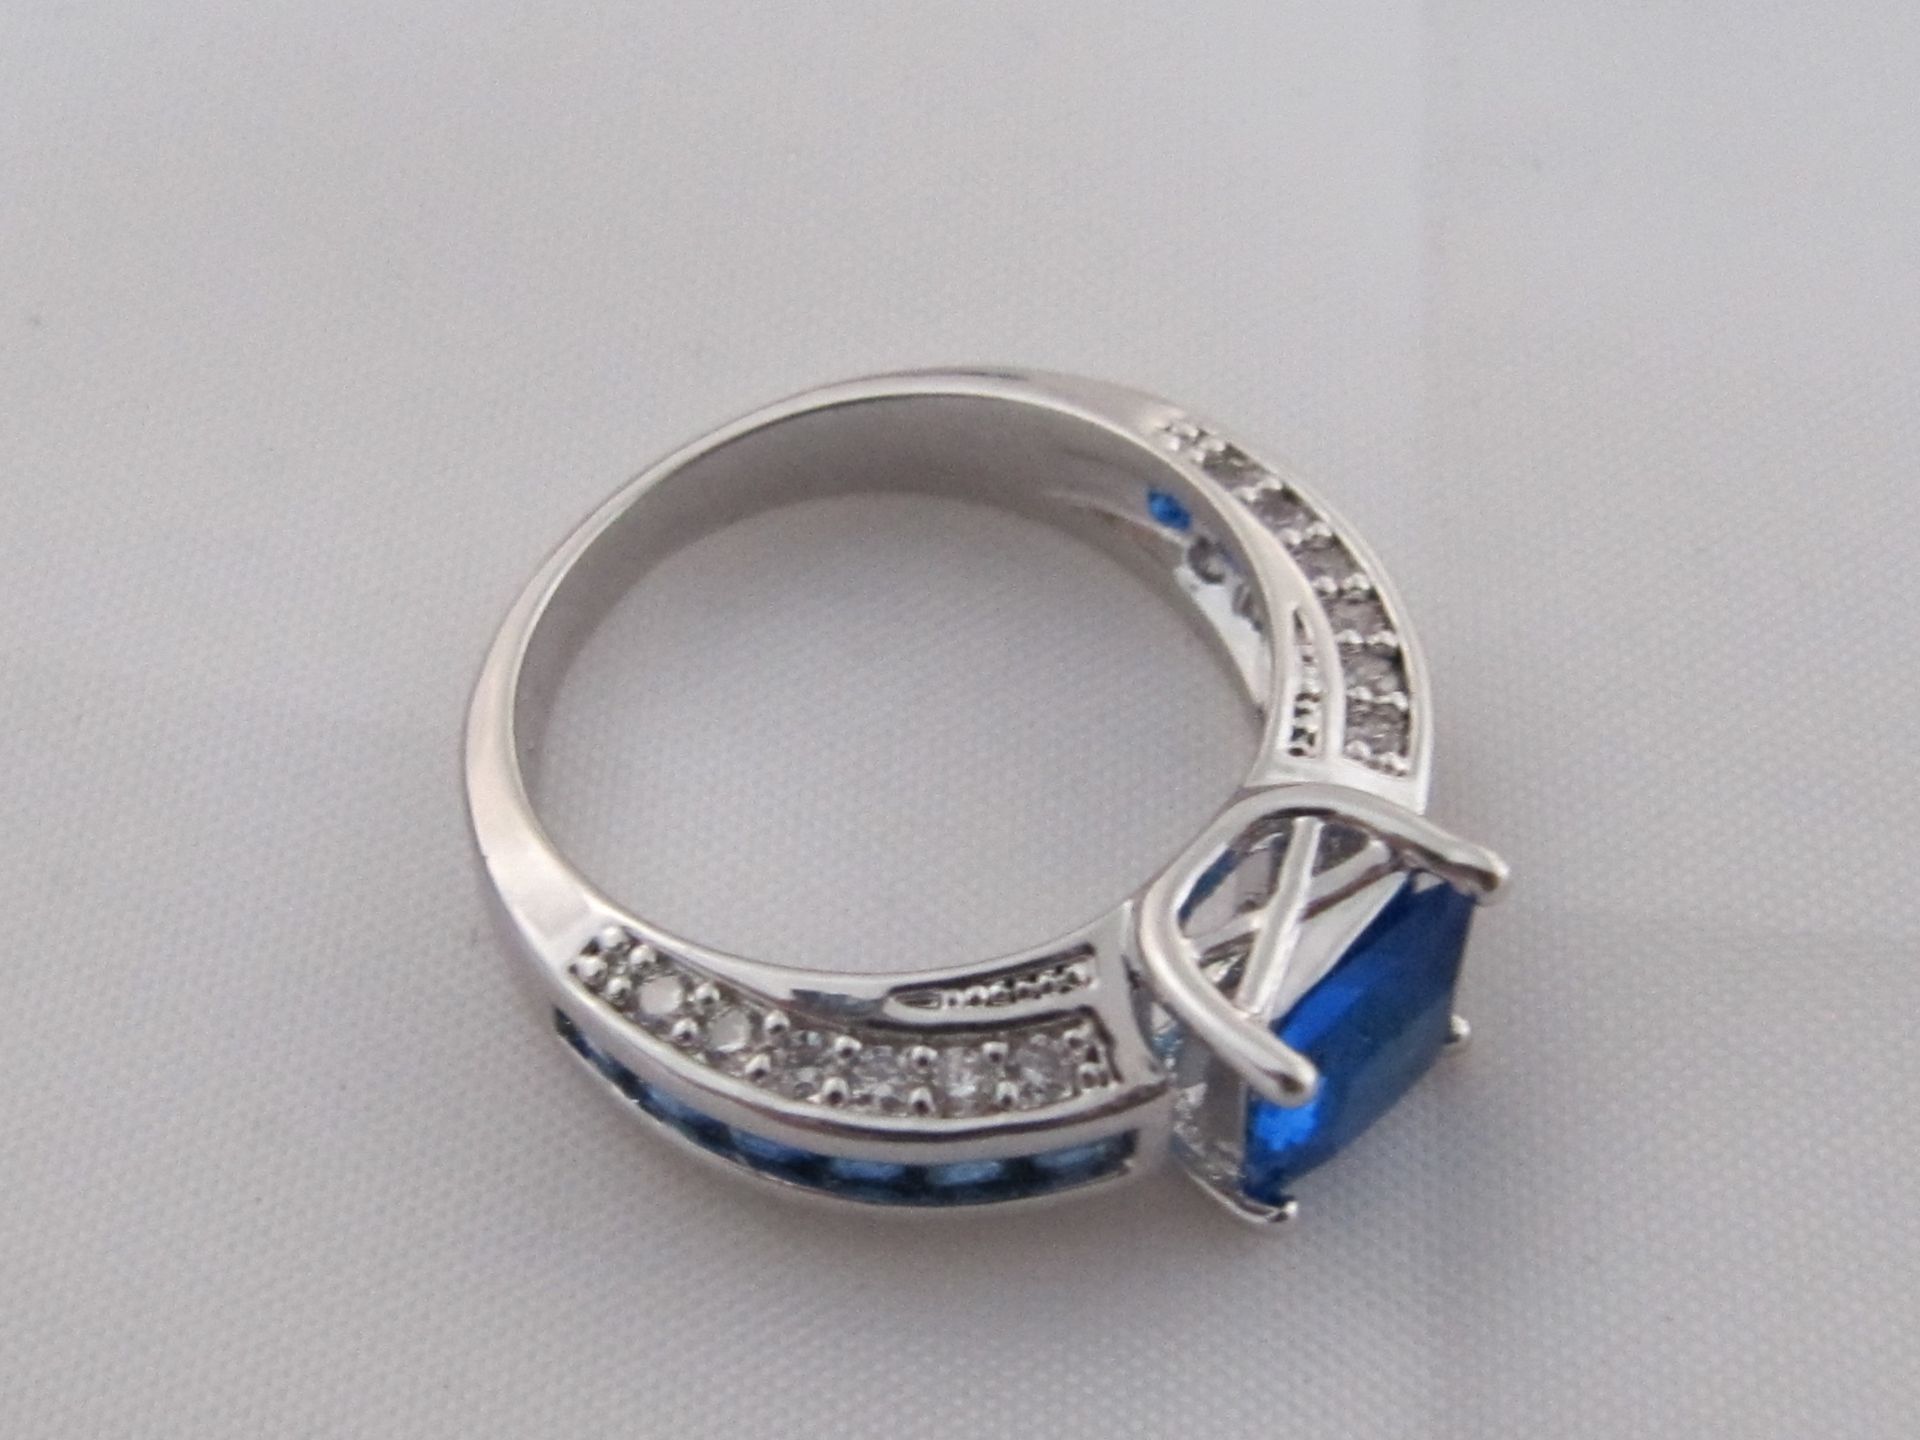 10k White Gold Filled with Blue Sapphires. Size S. - Image 2 of 5